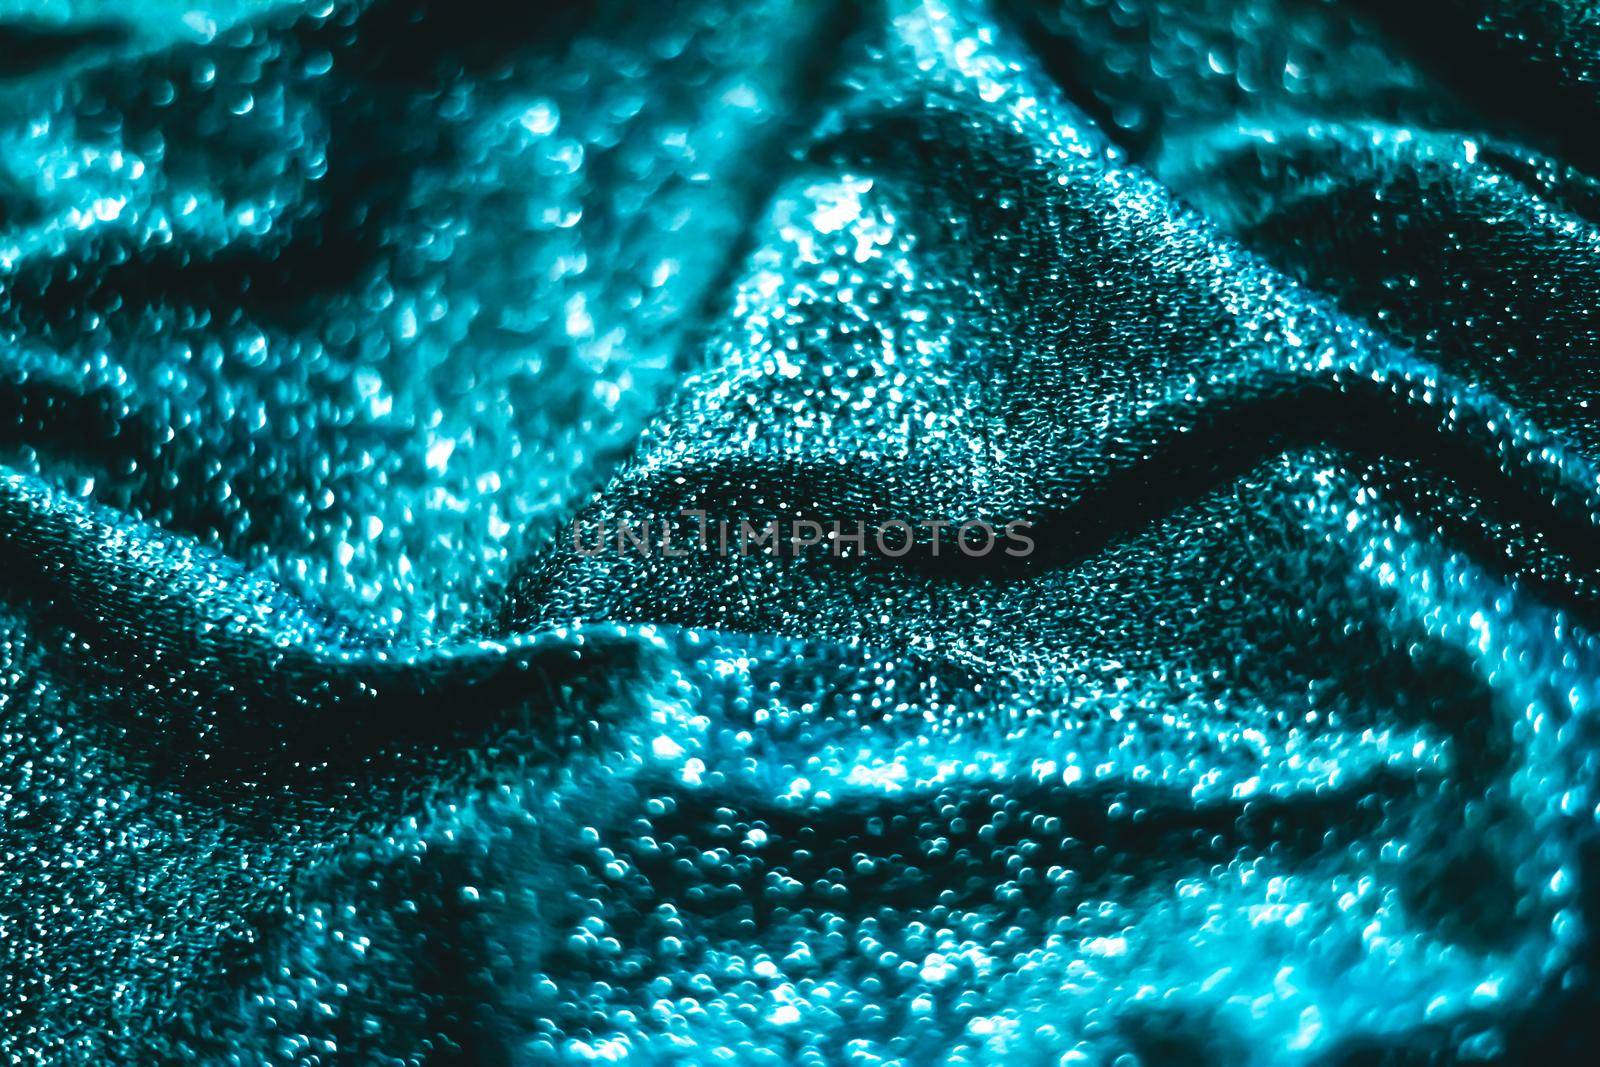 Luxe glowing texture, night club branding and New Years party concept - Emerald holiday sparkling glitter abstract background, luxury shiny fabric material for glamour design and festive invitation